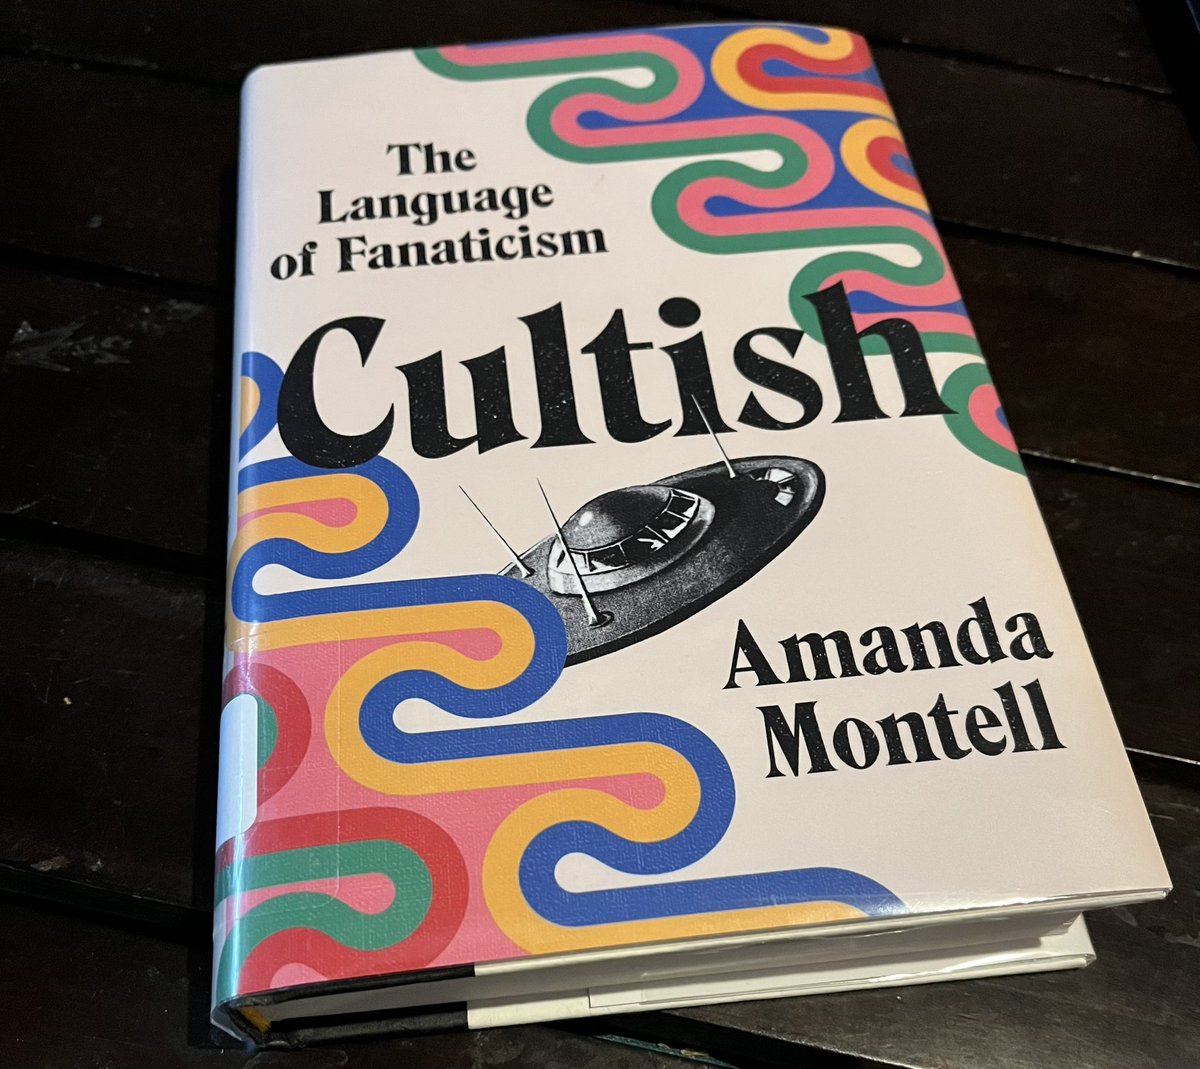 Psychologists agree that while gaslighters appear self-assured, they are typically motivated by extreme insecurity – an inability to self-regulate their own thoughts and emotions. #SundaySentence 1/2 from Cultish by @AmandaMontell